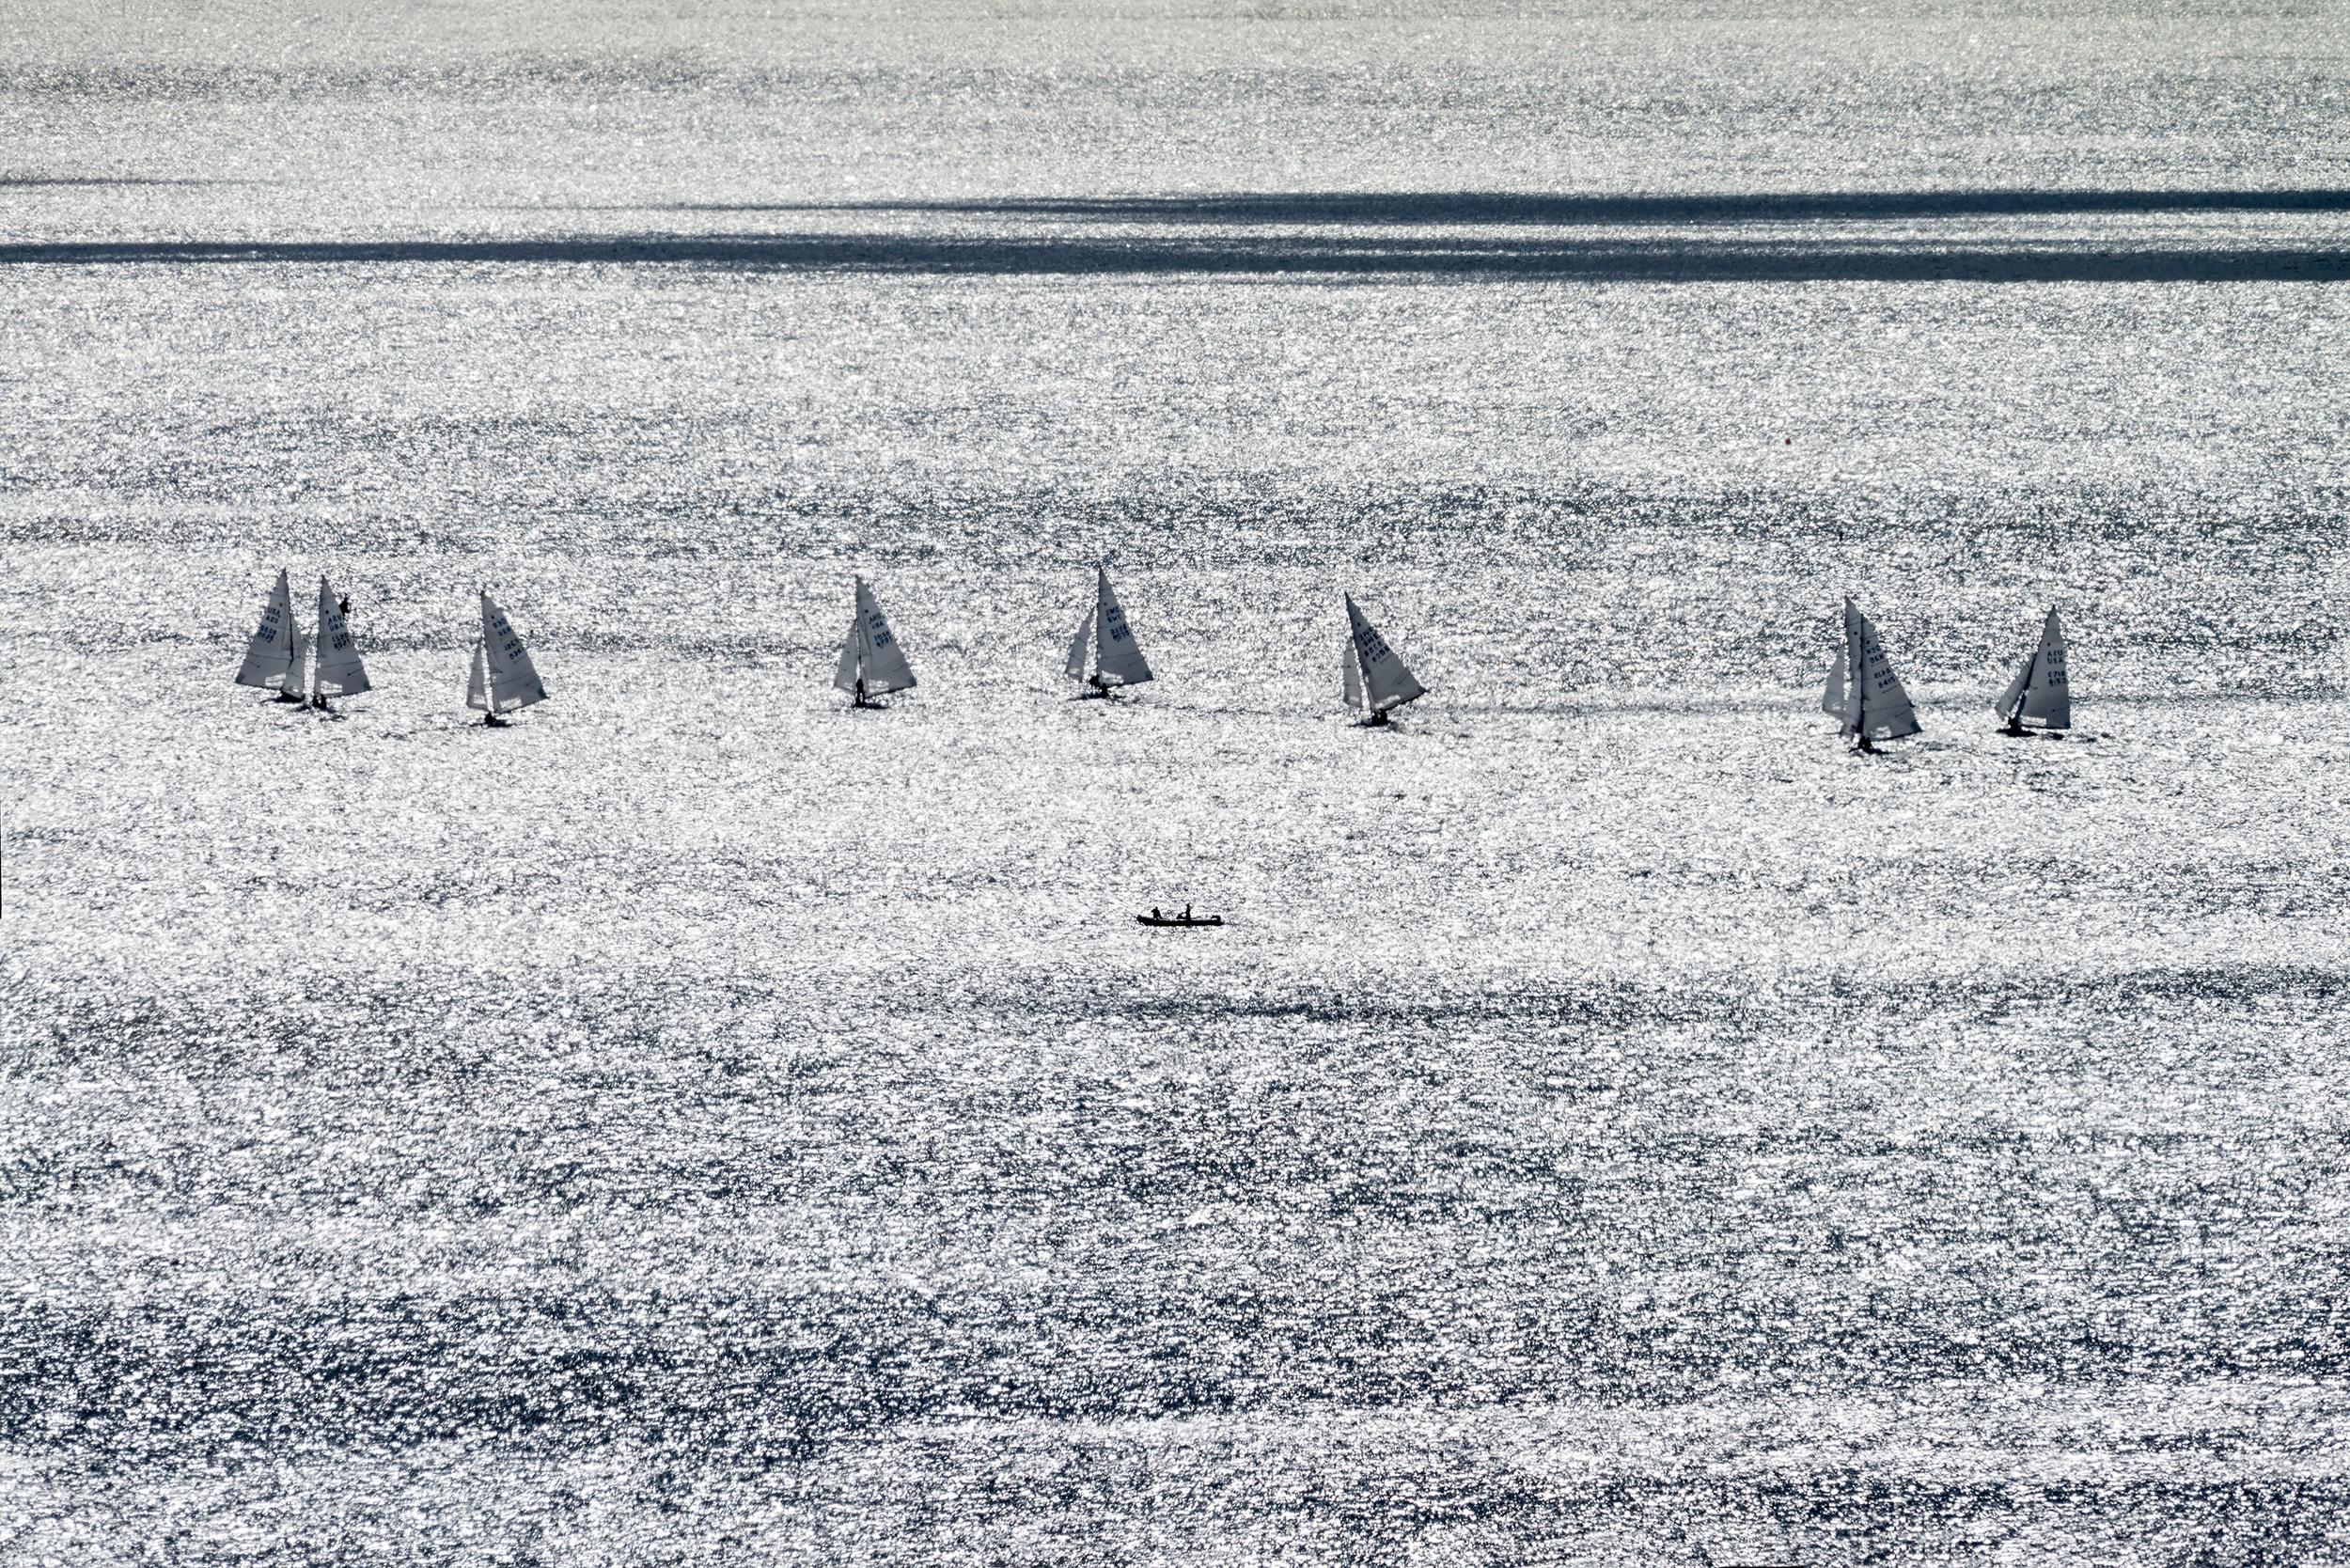 Sail Boats with Two Men in a Boat on a Silver Gray Sea, Monochromatic